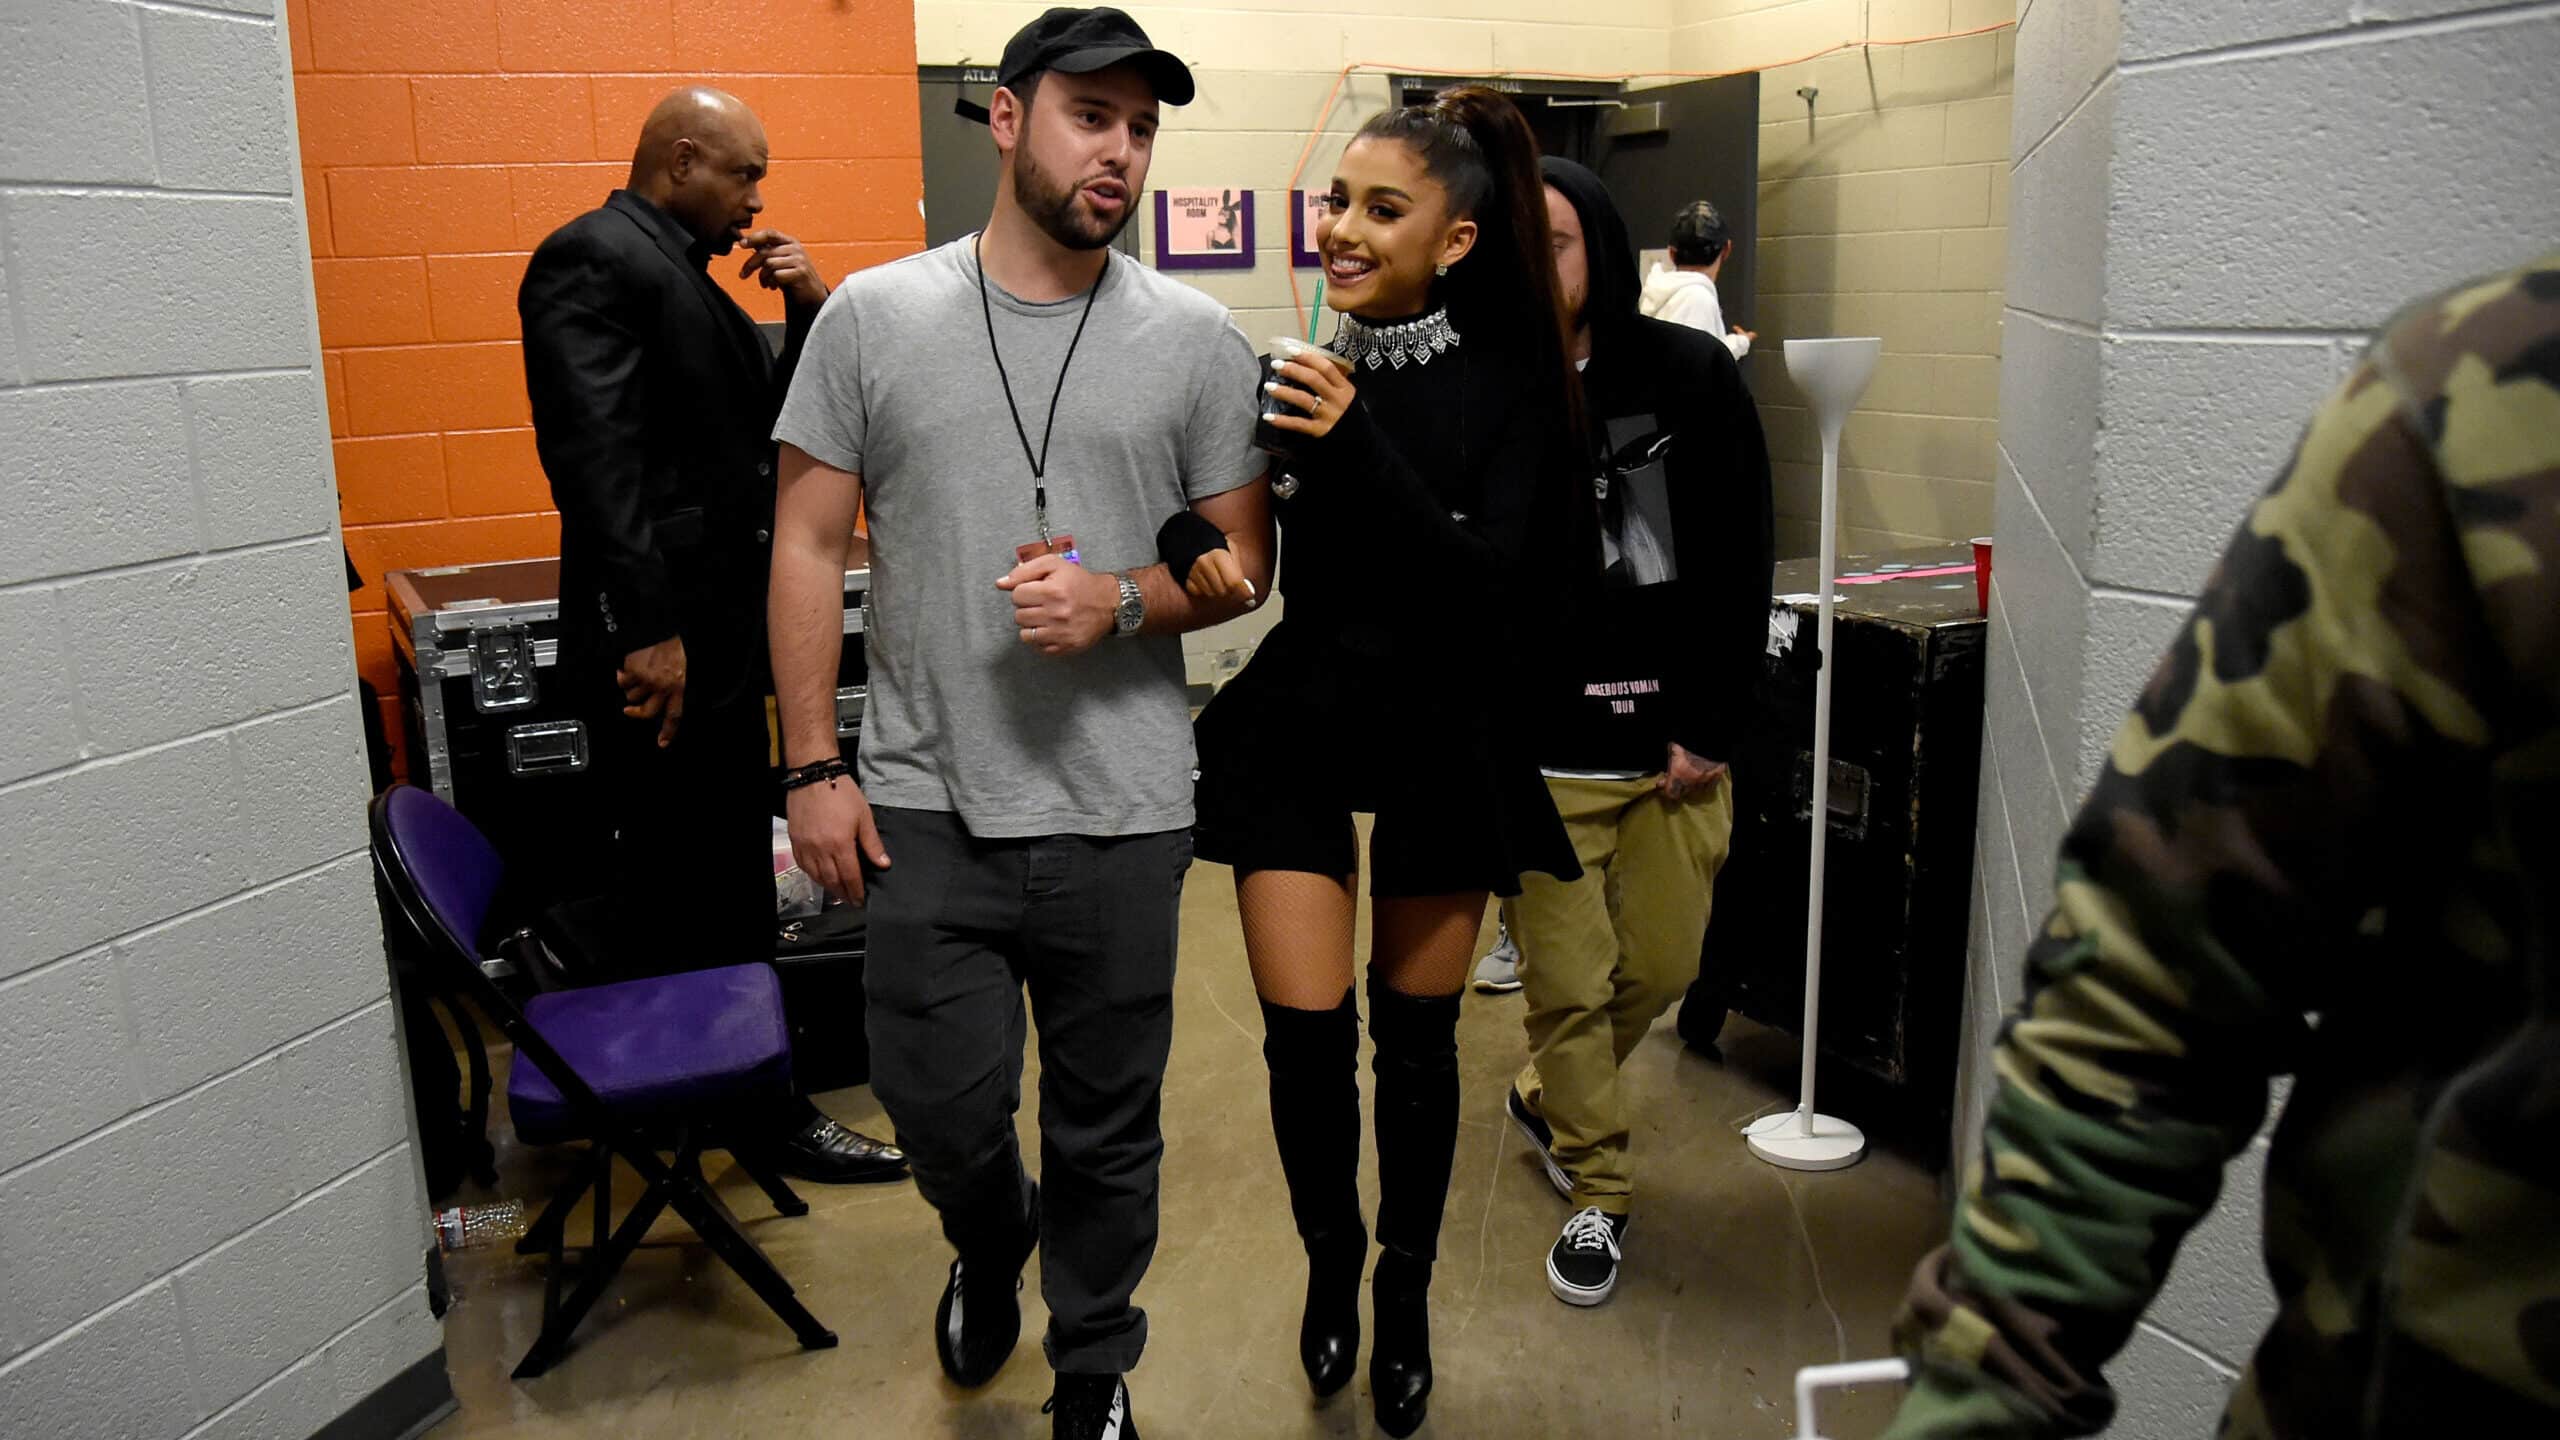 PHOENIX, AZ - FEBRUARY 03: (EXCLUSIVE COVERAGE) Scooter Braun (L) and Ariana Grande walk backstage during the "Dangerous Woman" Tour Opener at Talking Stick Resort Arena on February 3, 2017 in Phoenix, Arizona.